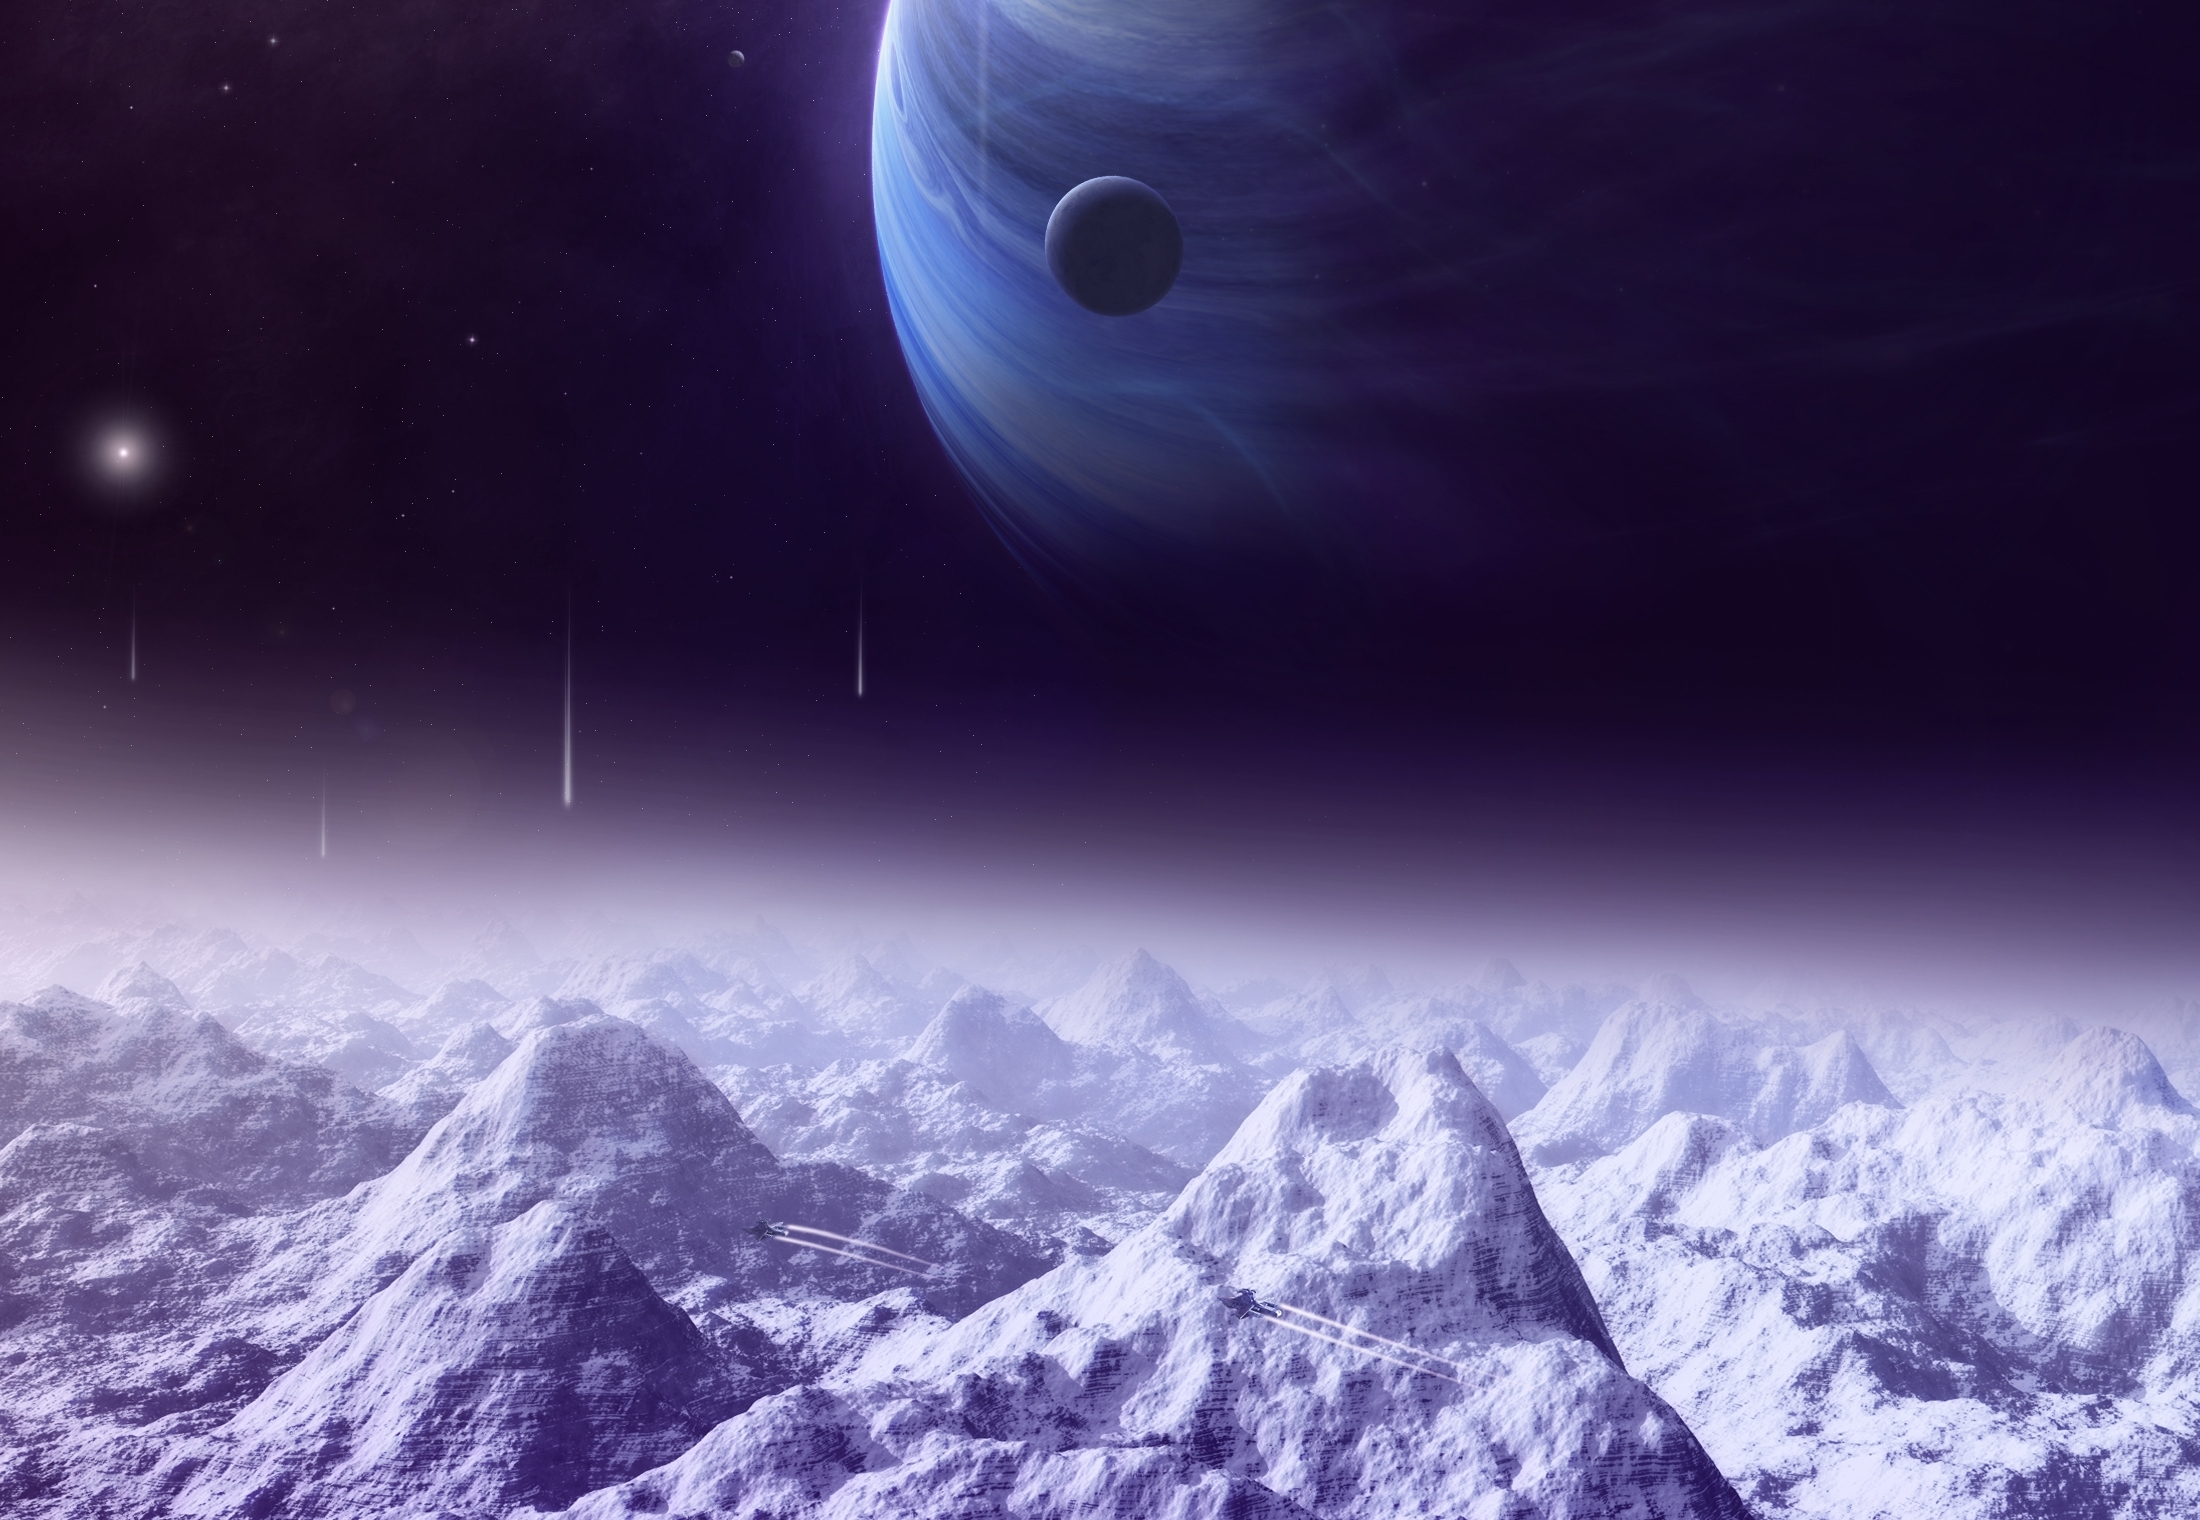 planets, Mountains, Snow, Space, Spaceship Wallpaper